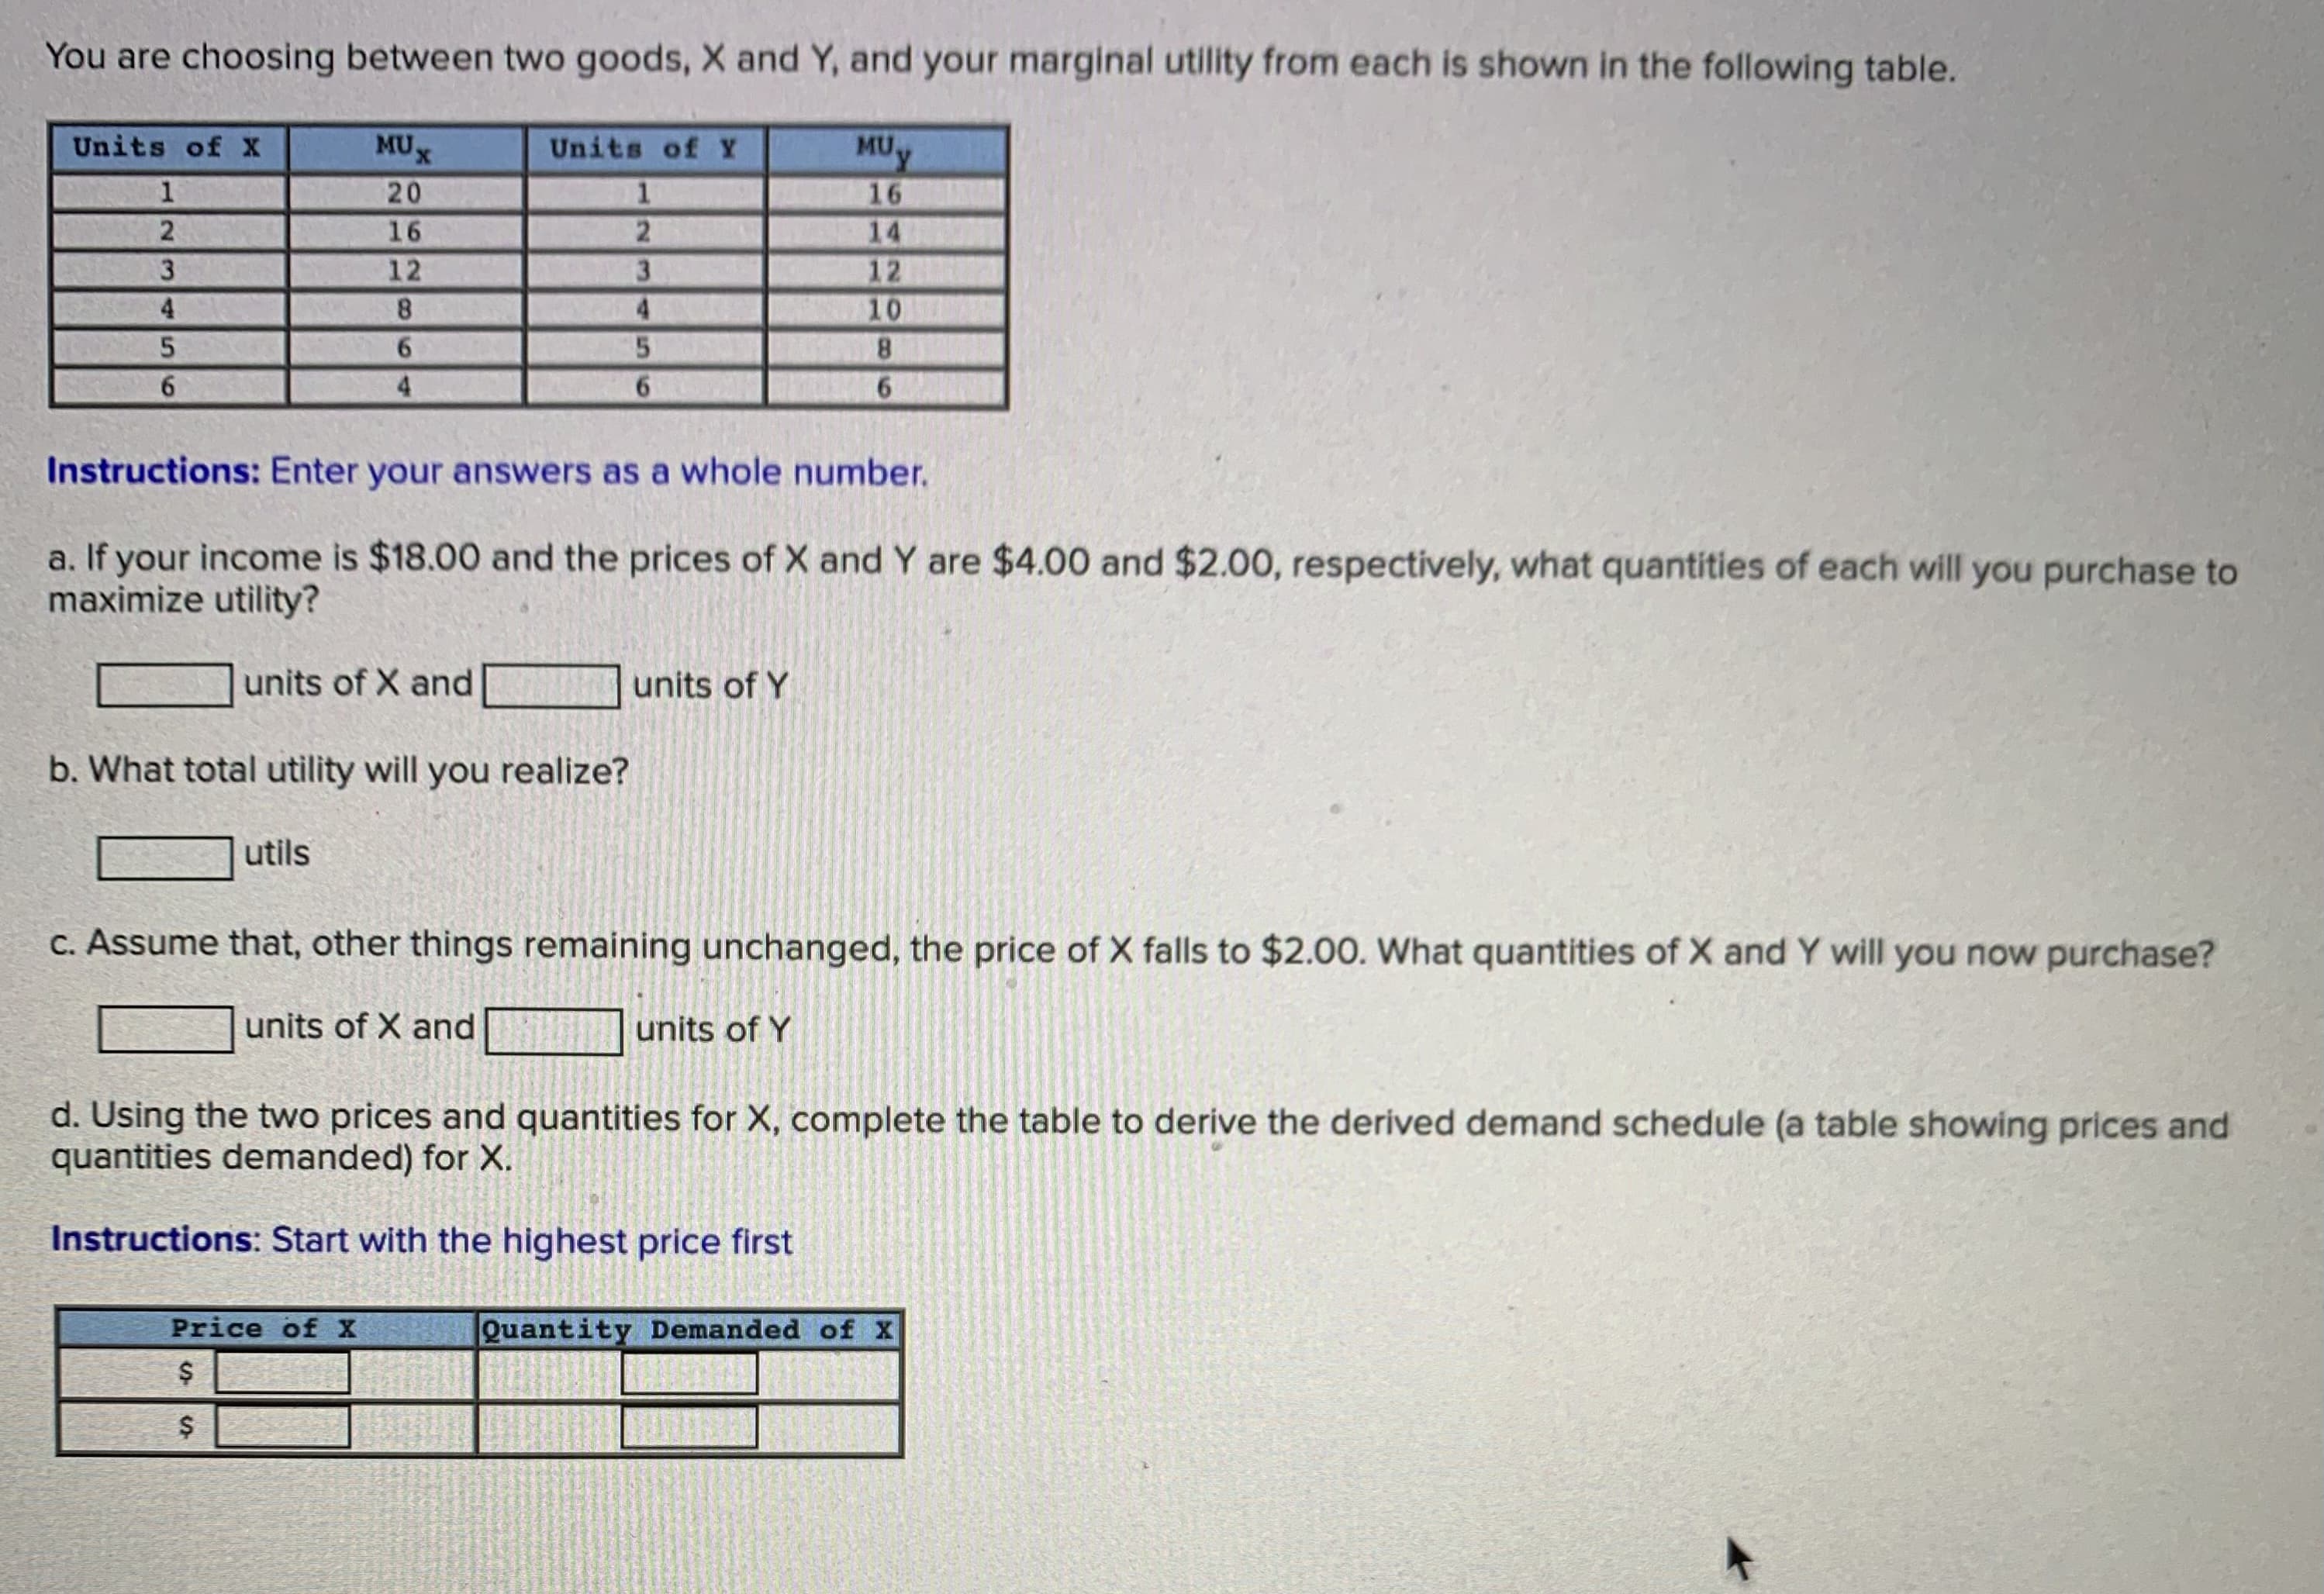 You are choosing between two goods, X and Y, and your marginal utility from each is shown in the following table.
Units of X
MUX
Units of Y
MU
1
20
16
14
16
3.
12
3.
12
4
8.
4.
10
6.
4.
8.
6.
6.
Instructions: Enter your answers as a whole number.
a. If your income is $18.00 and the prices of X and Y are $4.00 and $2.00, respectively, what quantities of each will you purchase to
maximize utility?
units of X and
units of Y
b. What total utility will you realize?
utils
